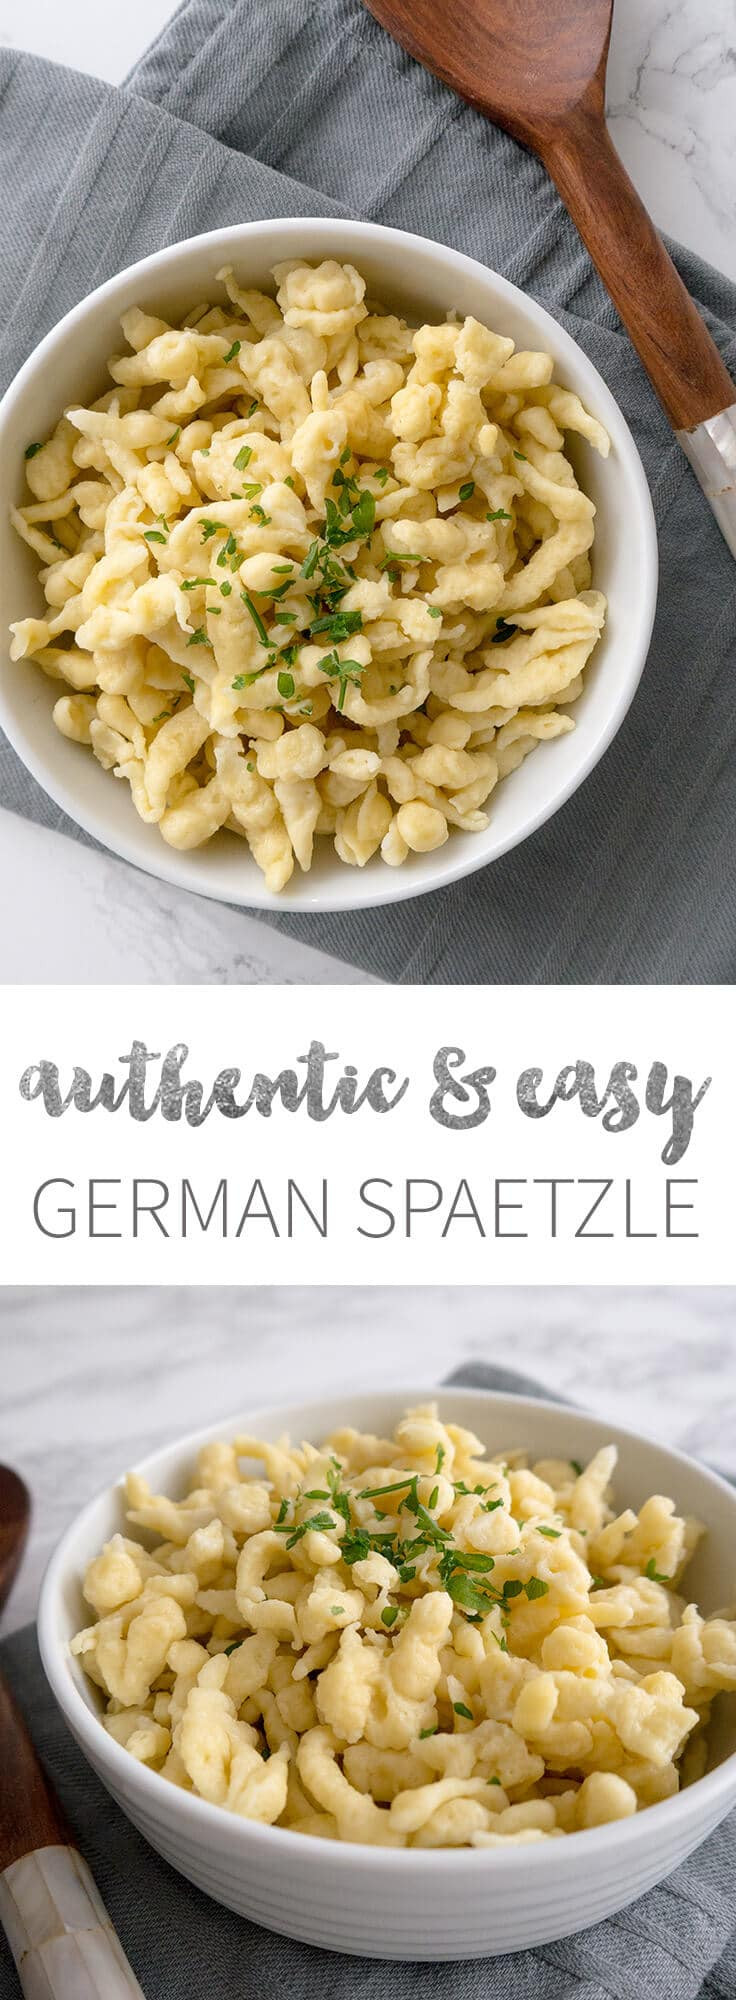 Recipes With Spaetzle Noodles
 Easy German Spaetzle Recipe German Egg Noodles